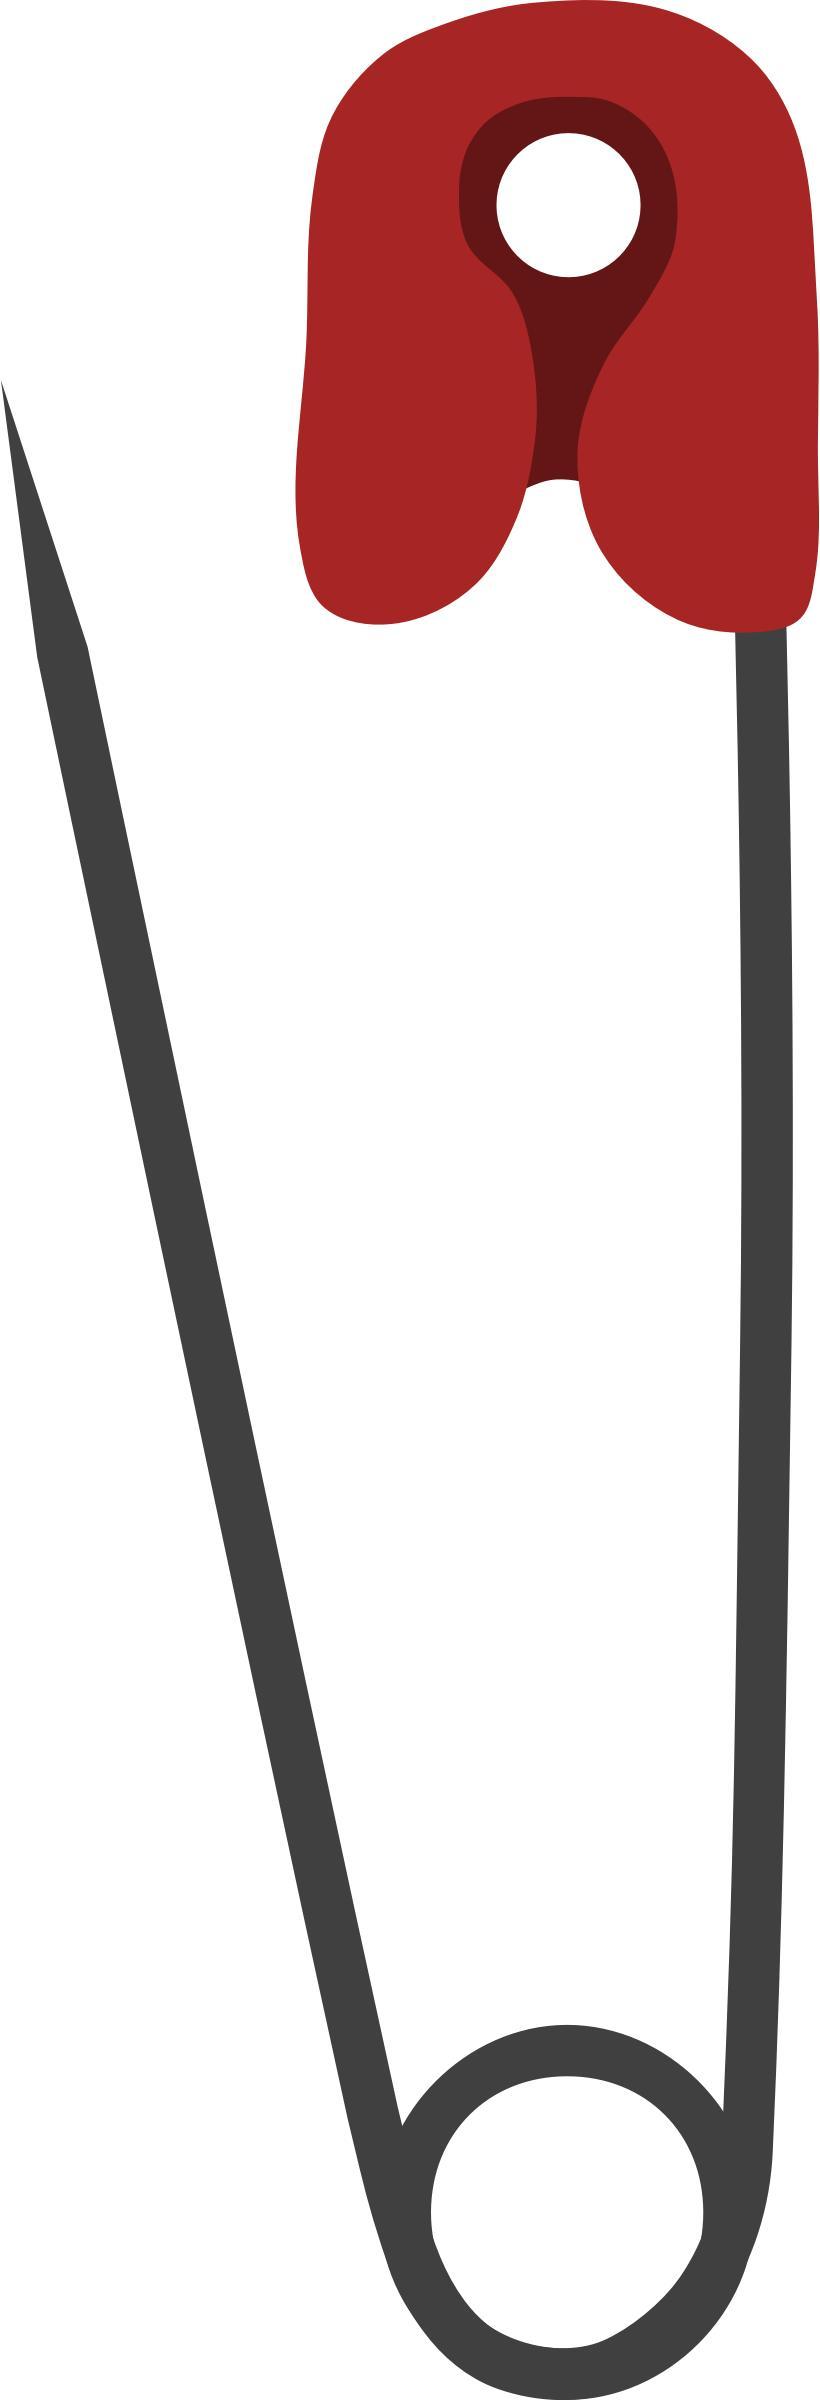 Safety pin 2 png transparent